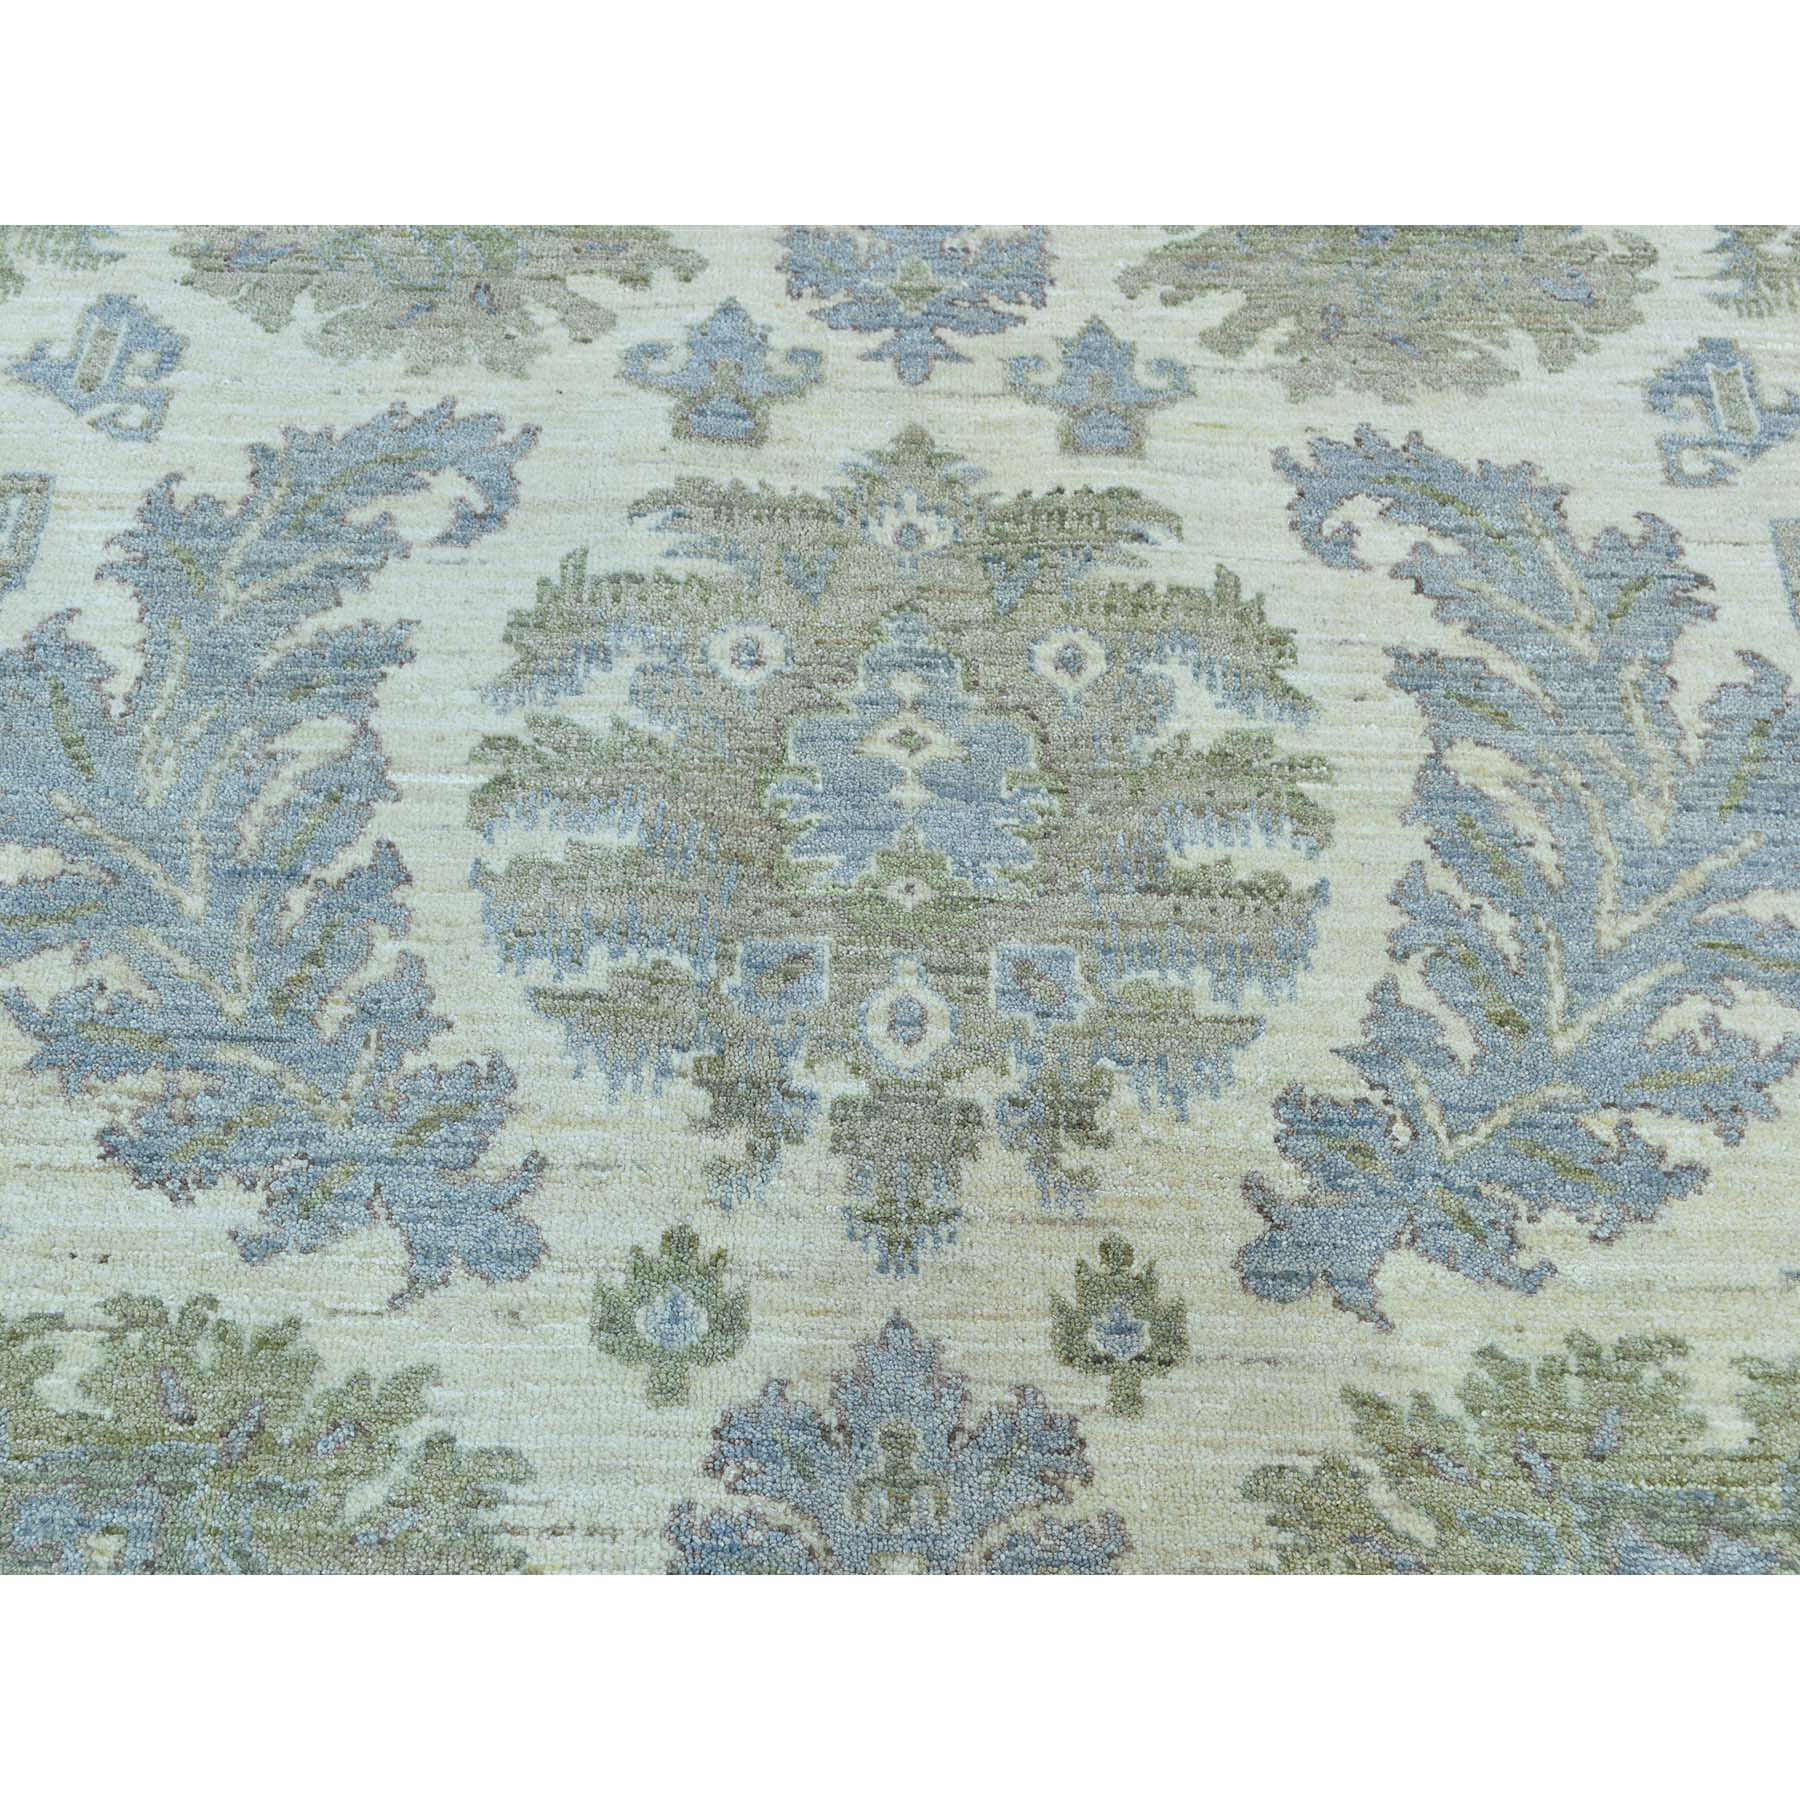 9-1 x12- Hand-Knotted Peshawar With Leaf Design Pure Wool Oriental Rug 